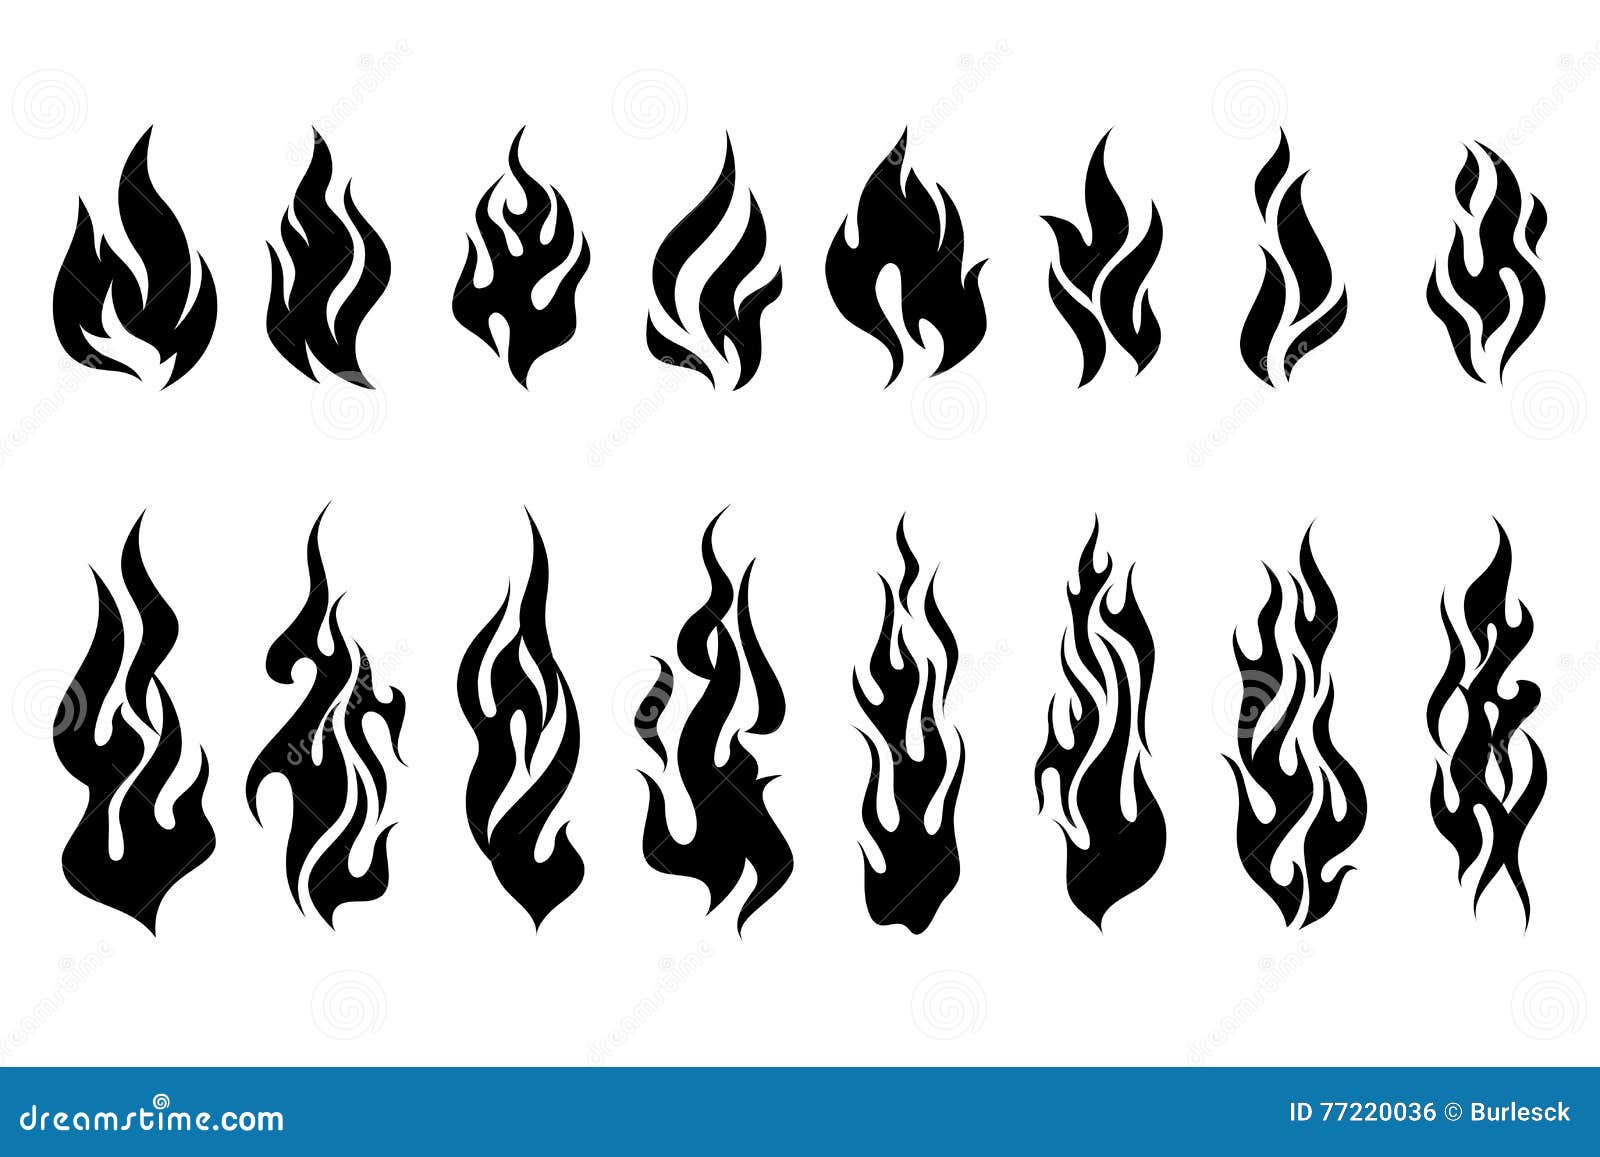 Fire Tattoo Vector. Fire Flames Tattoo Set. Illustration Monochrome Flame  Royalty Free SVG, Cliparts, Vectors, and Stock Illustration. Image 95458839.